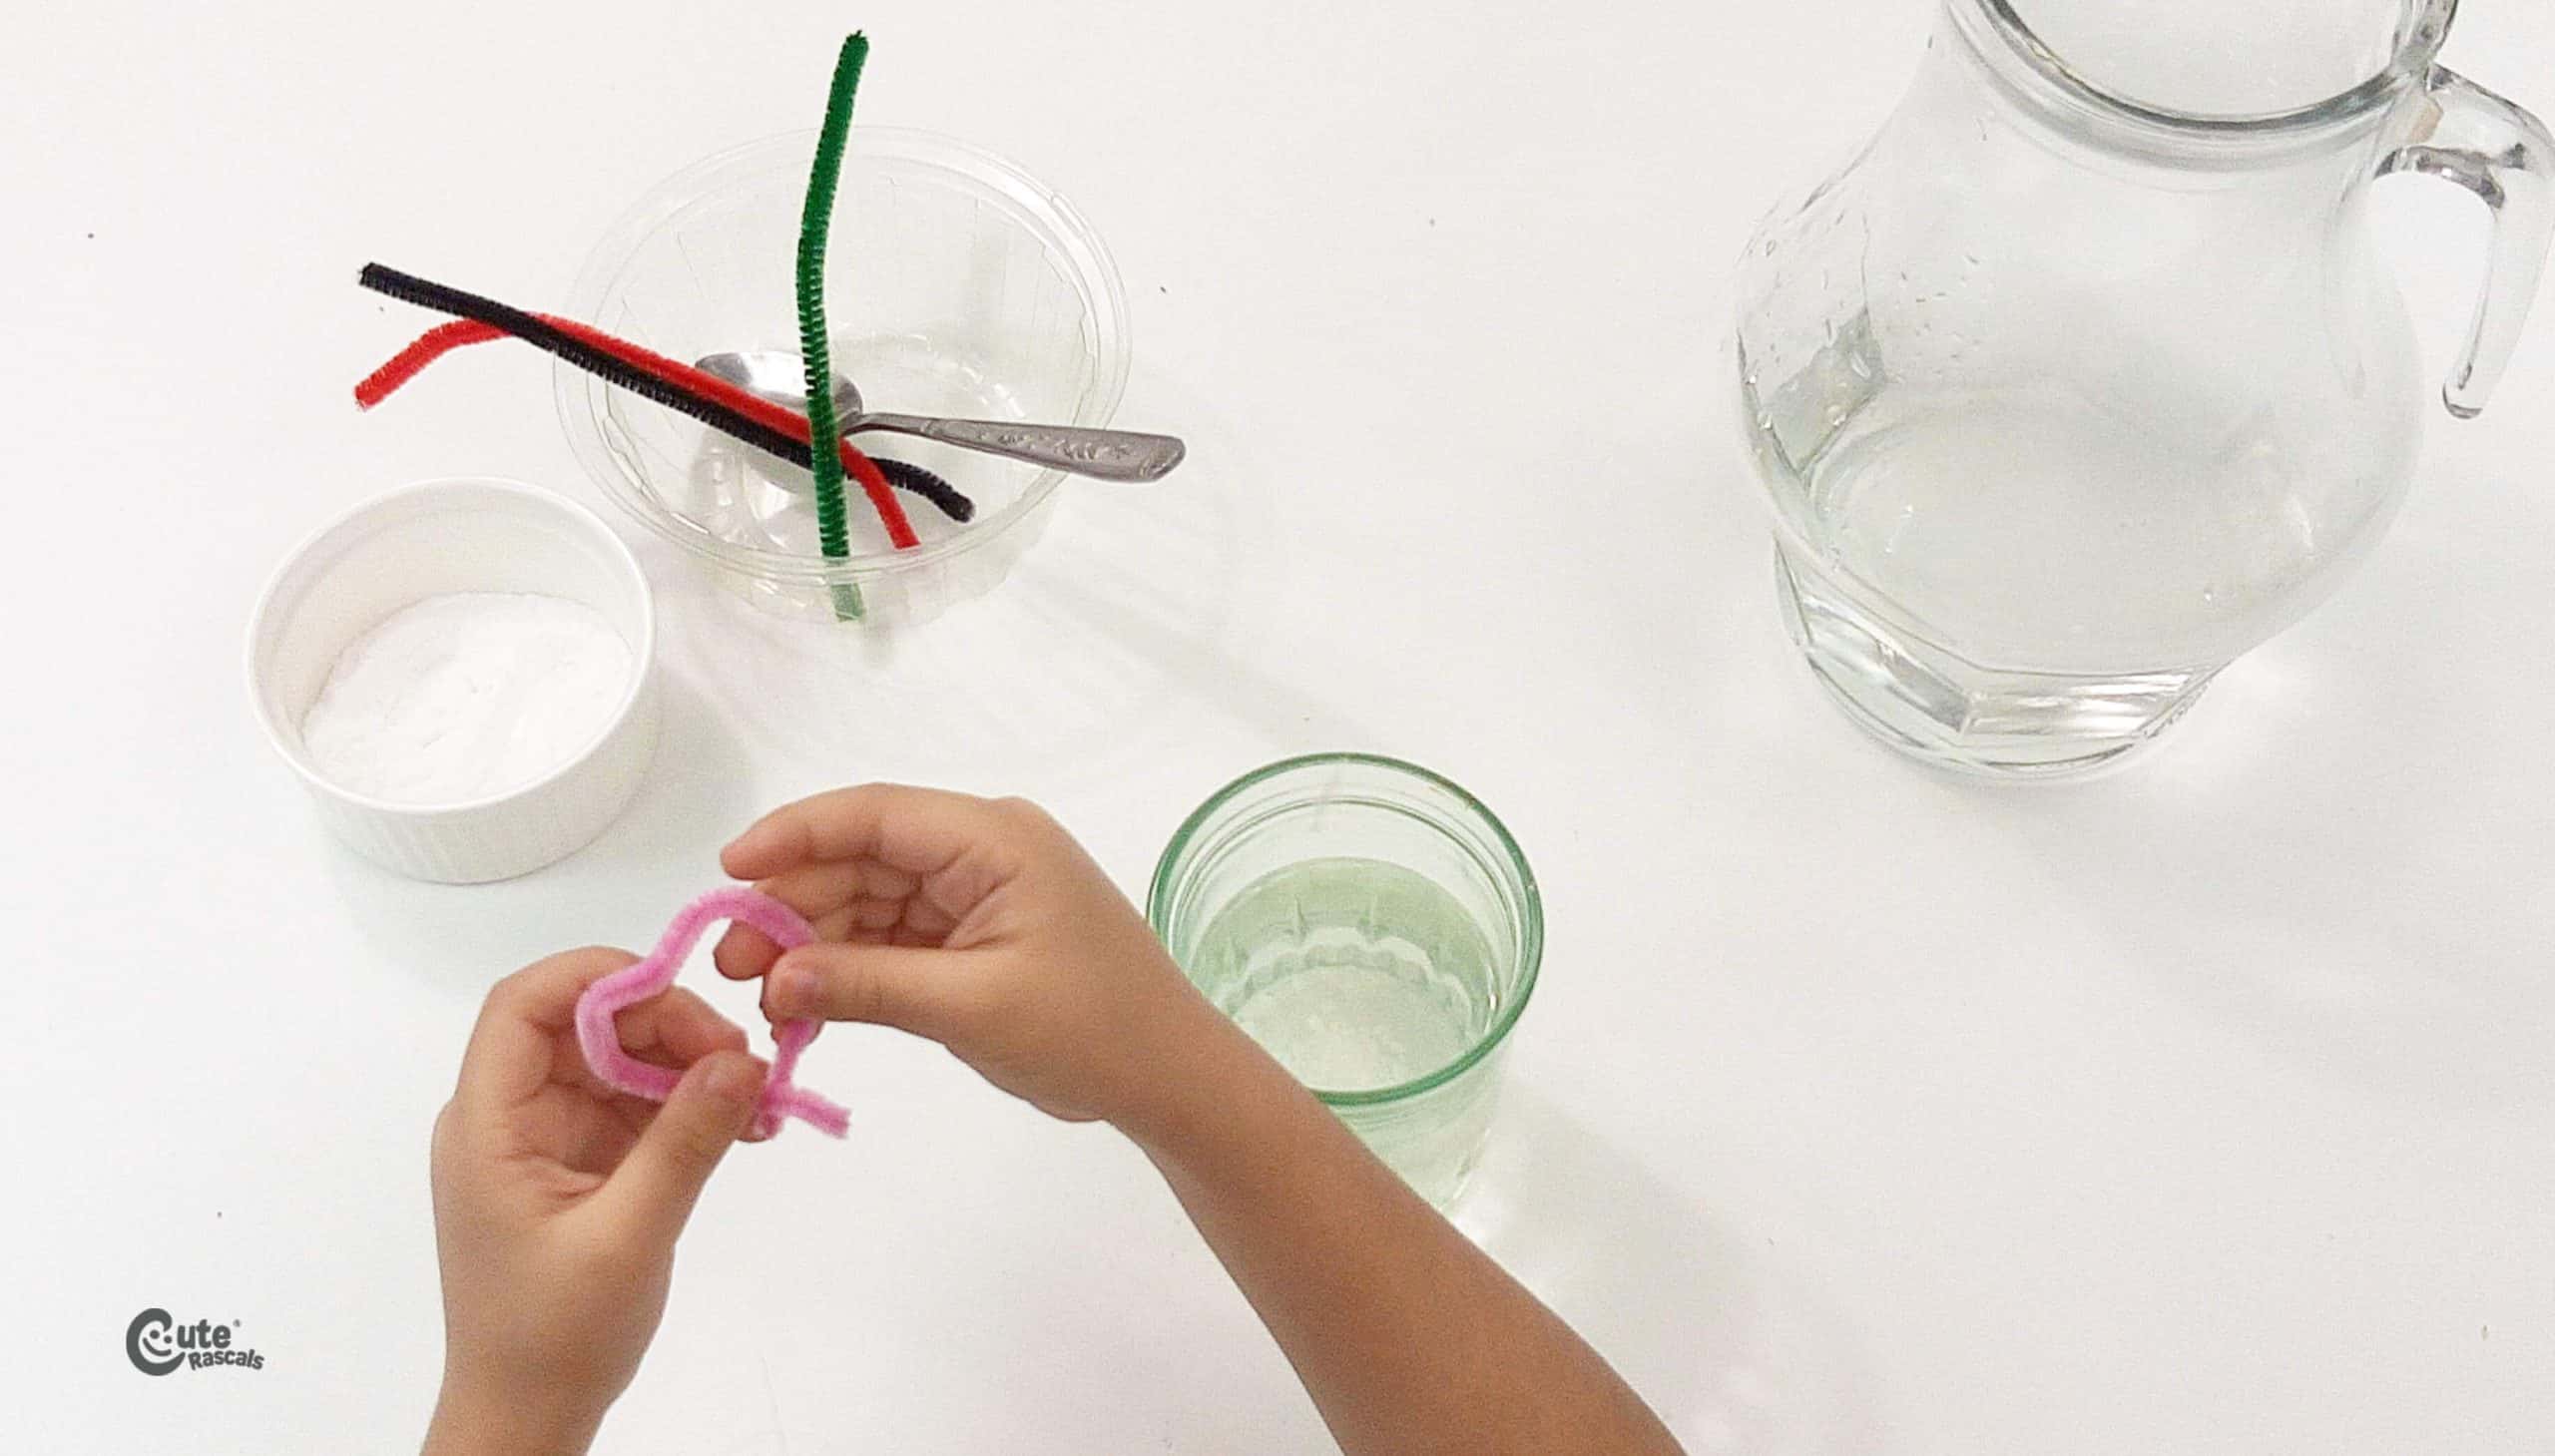 Make a chain of hearts with the pipe-cleaners